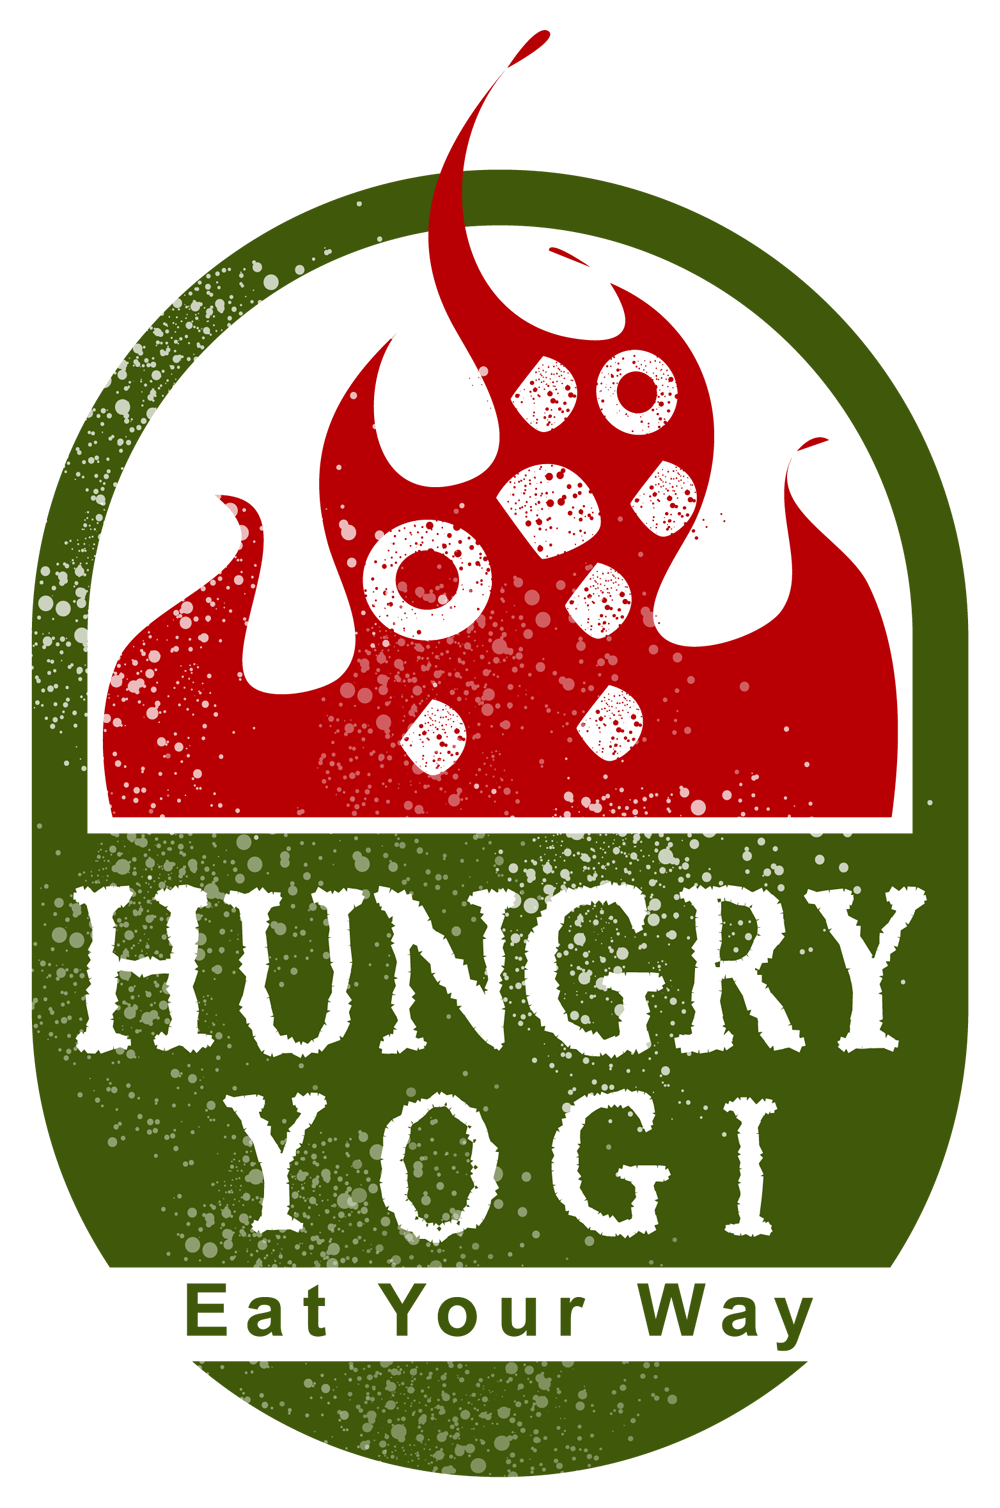 Red and Green Food Logo - Food logo design for a brand new kitchen. Hungry Yogi. Eat your way